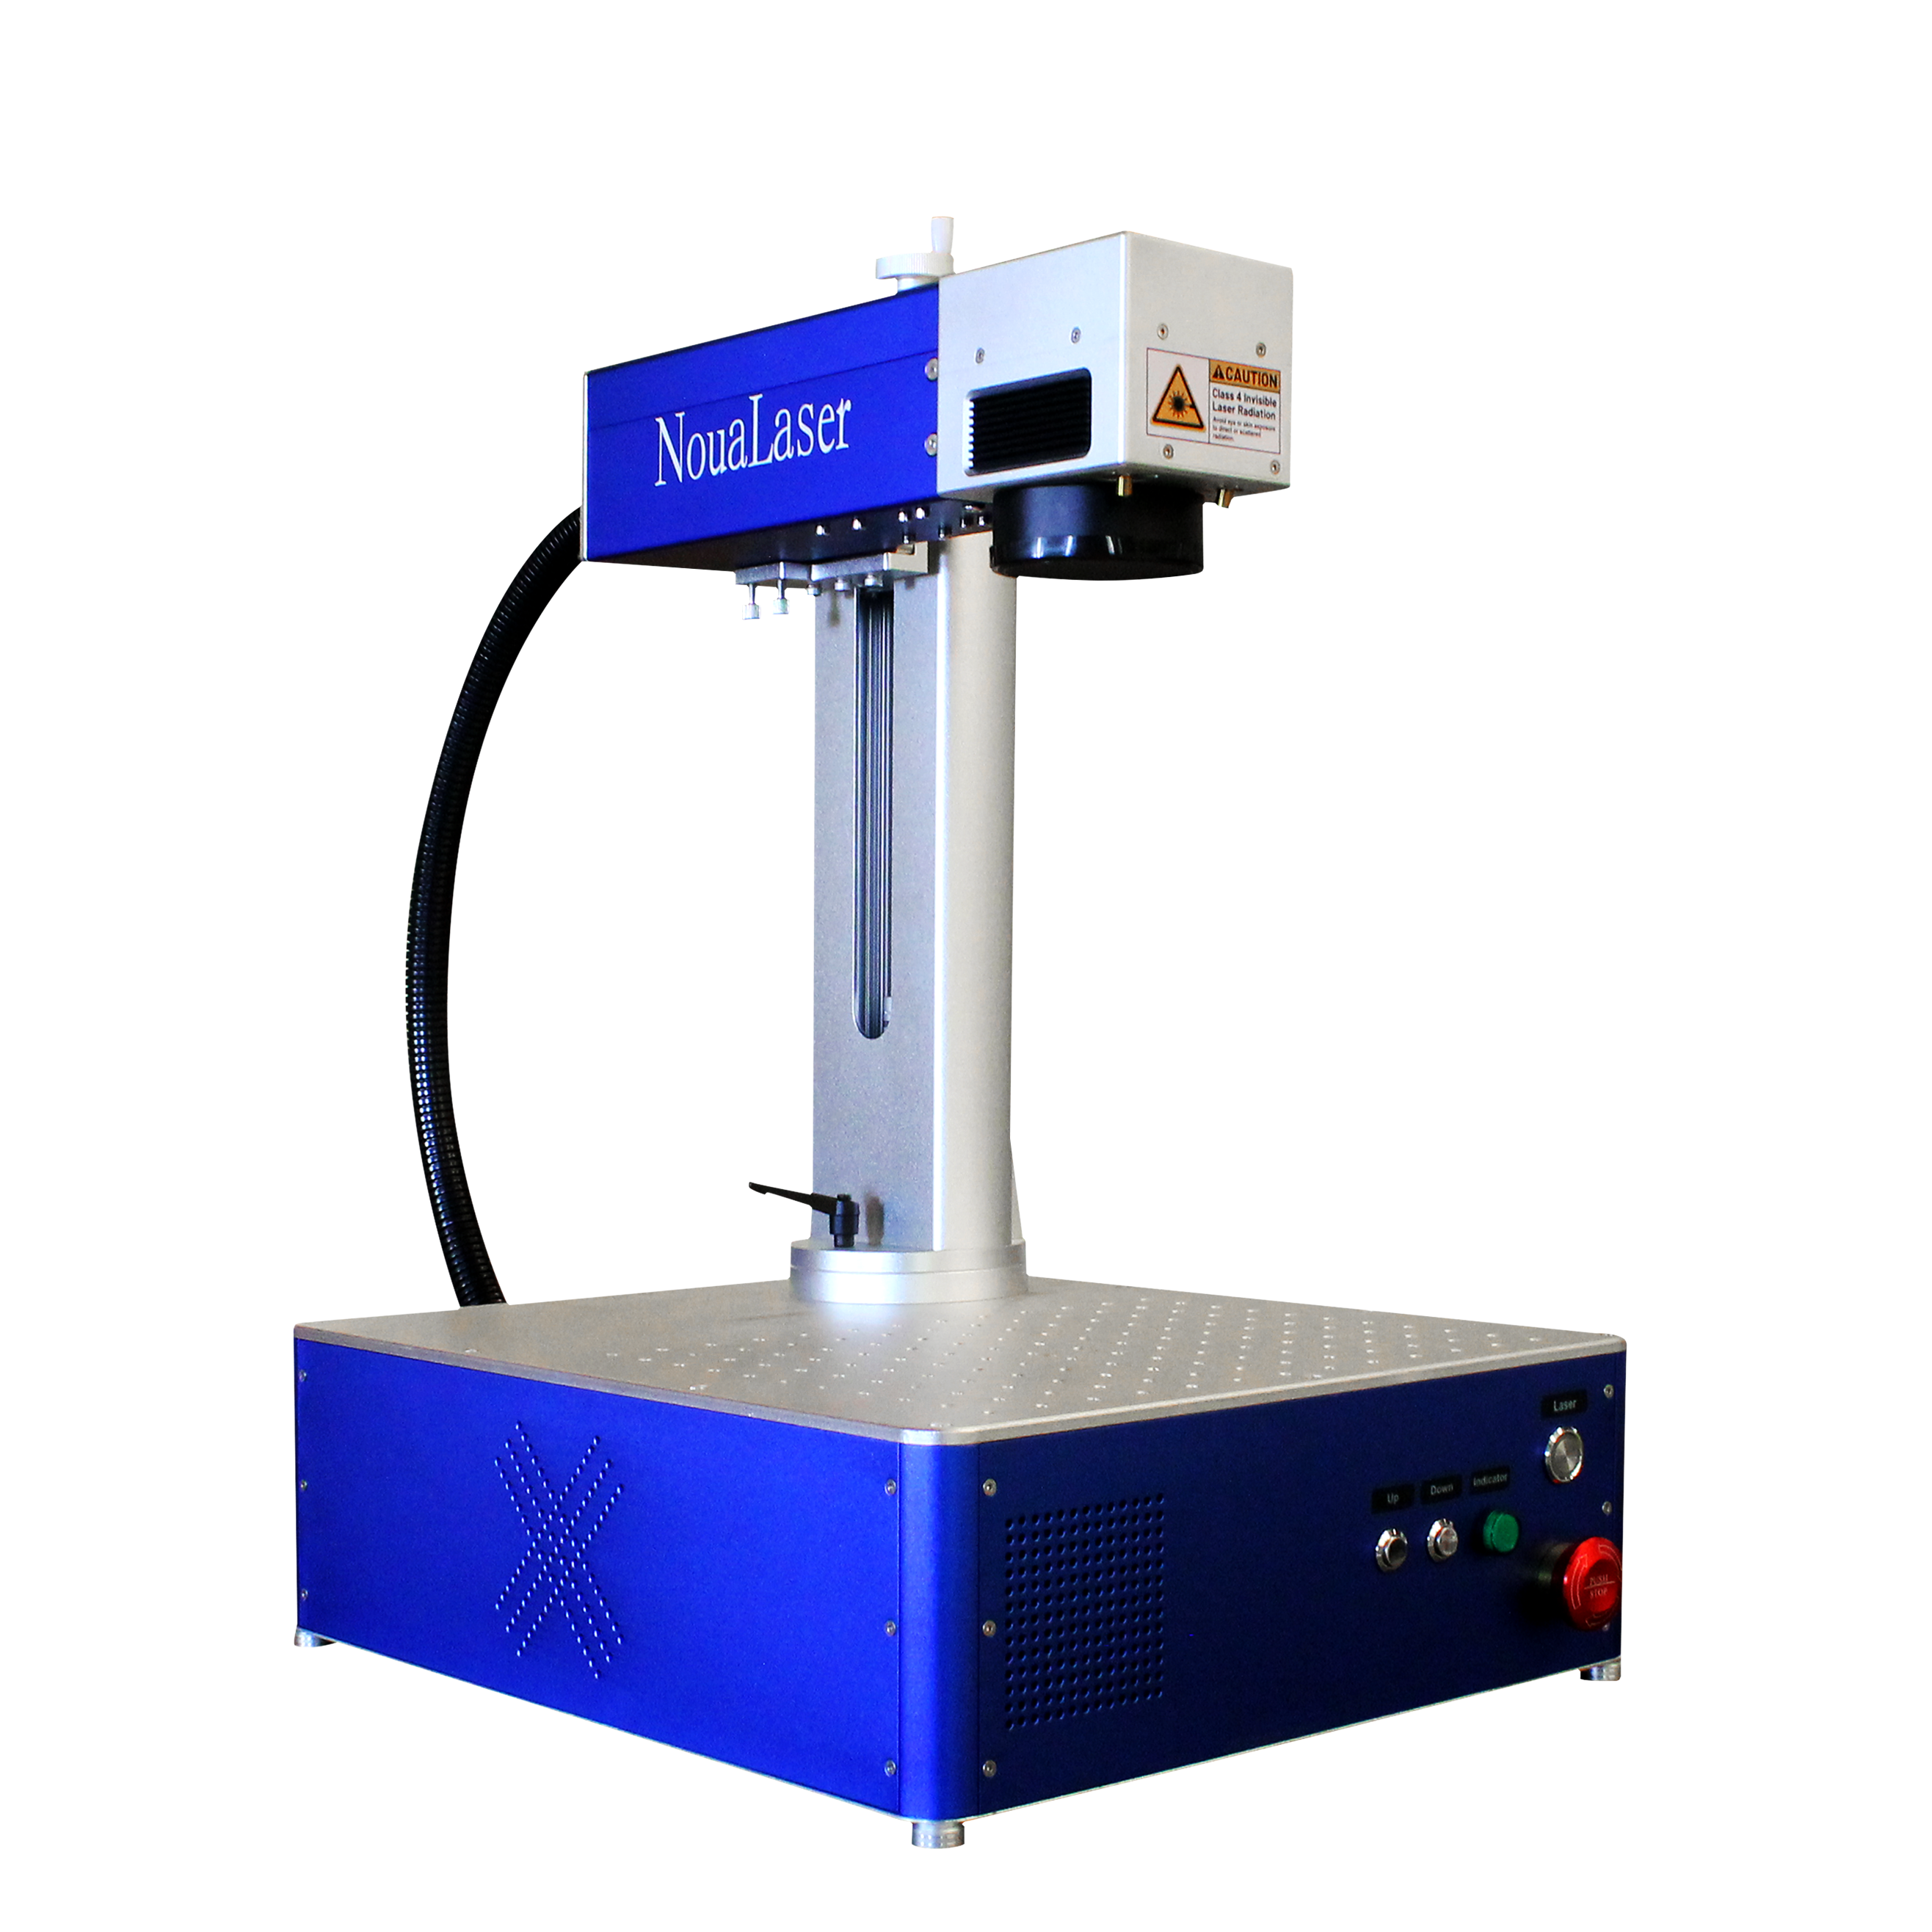 US Stock NouaLaser Fiber Laser Marking Machine Electric UP DOWN,include LightBurn,With Rotary Axis, 6 in Inline fans, OD7+ glasses